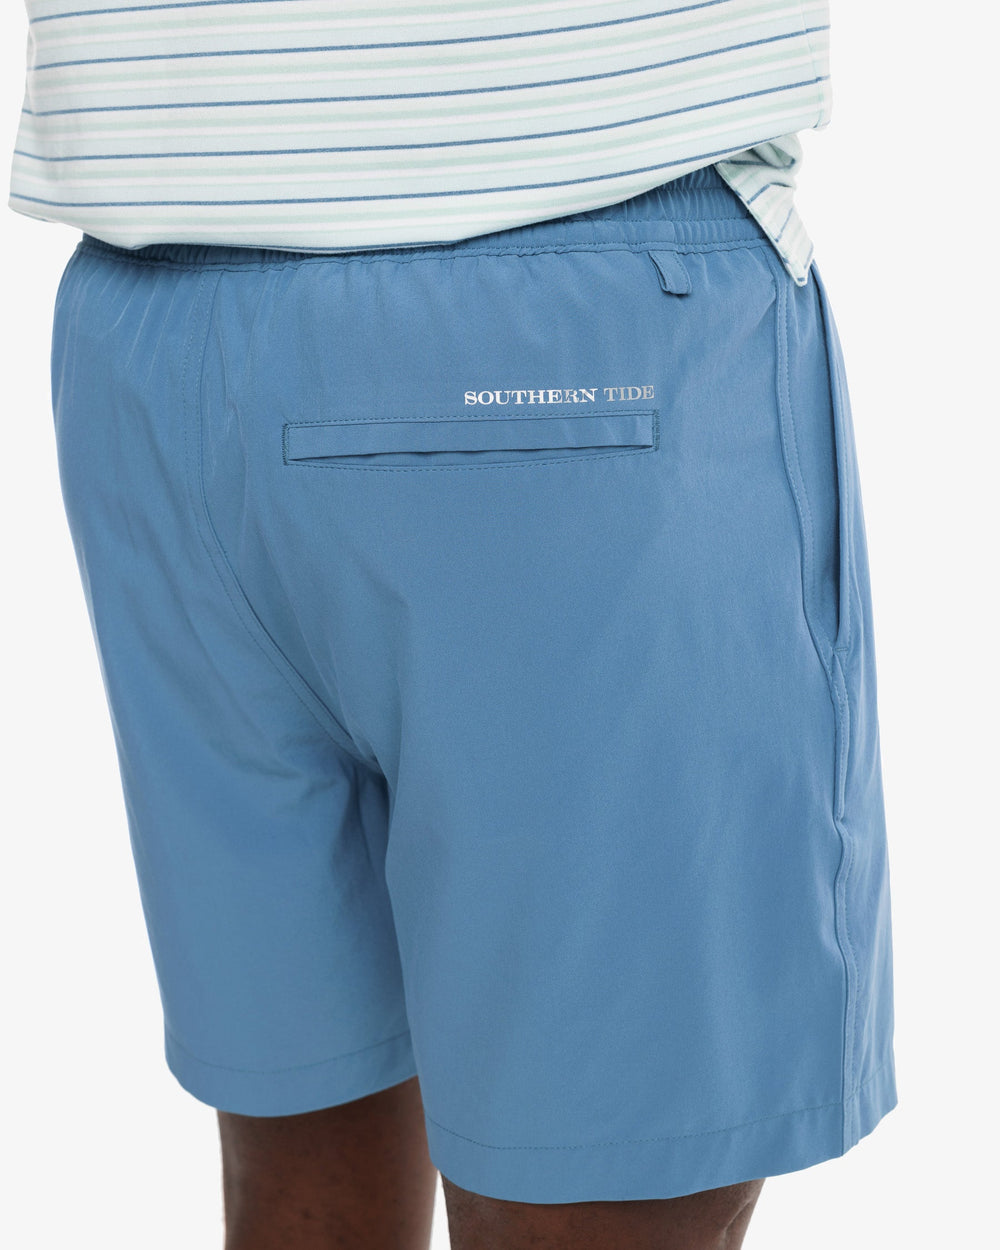 The model pocket view of the Men's Rip Channel 6 Inch Performance Short by Southern Tide - Blue Ridge